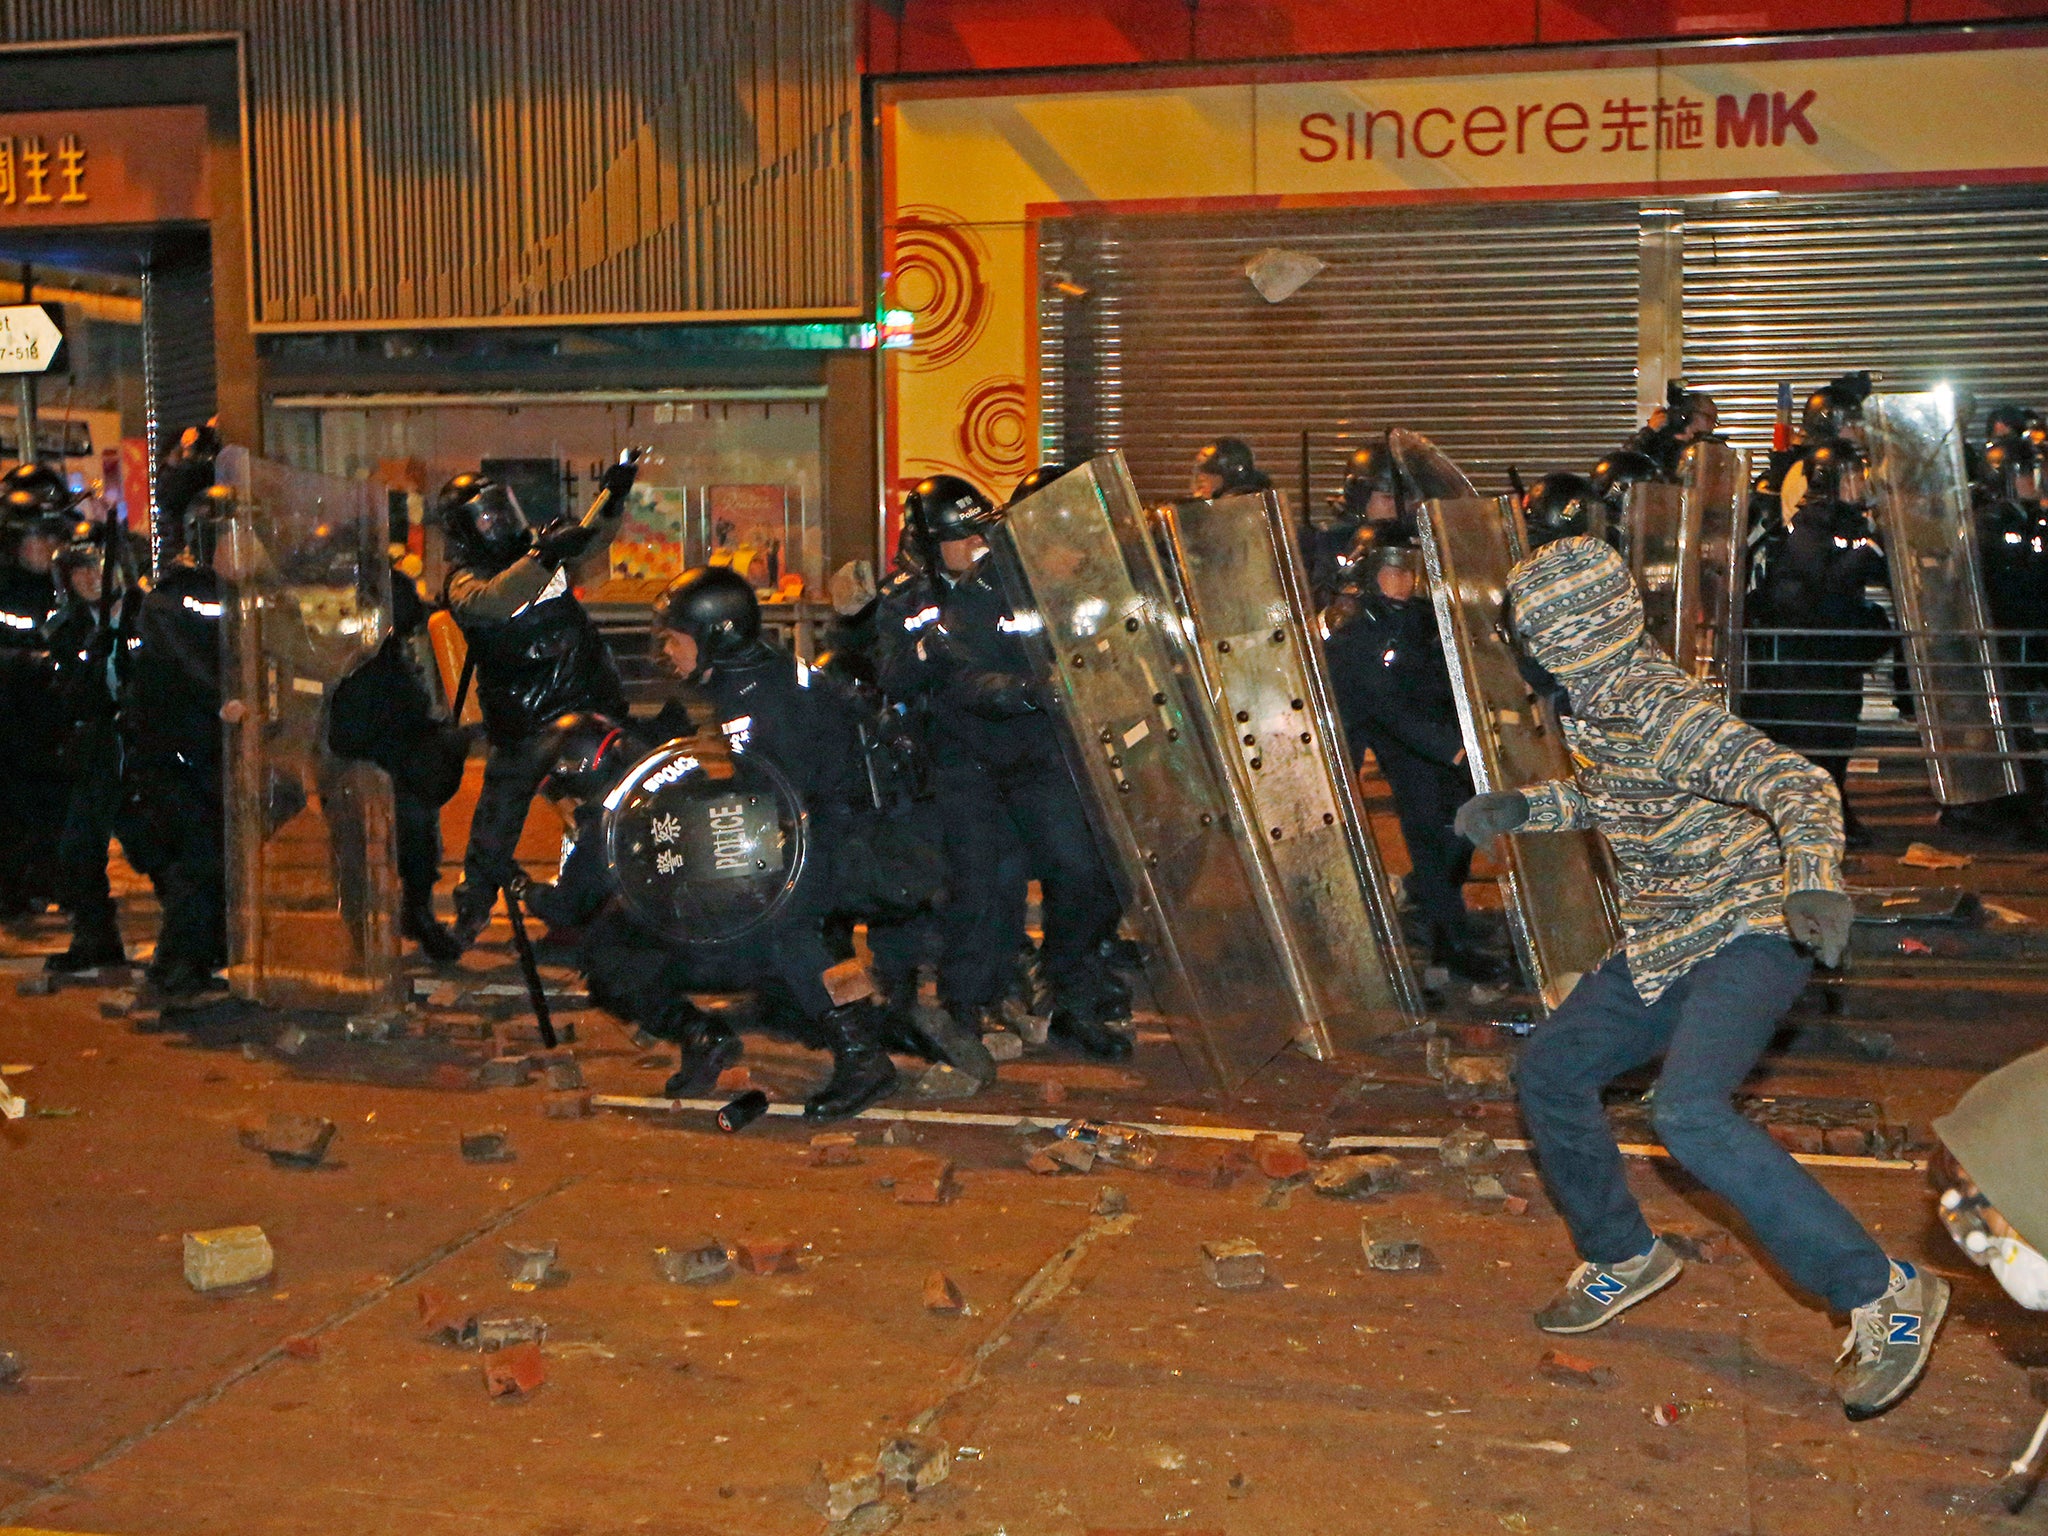 &#13;
A rioter throws brick at police on a street in Mong Kok district of Hong Kong, Tuesday, Feb. 9, 2016.&#13;